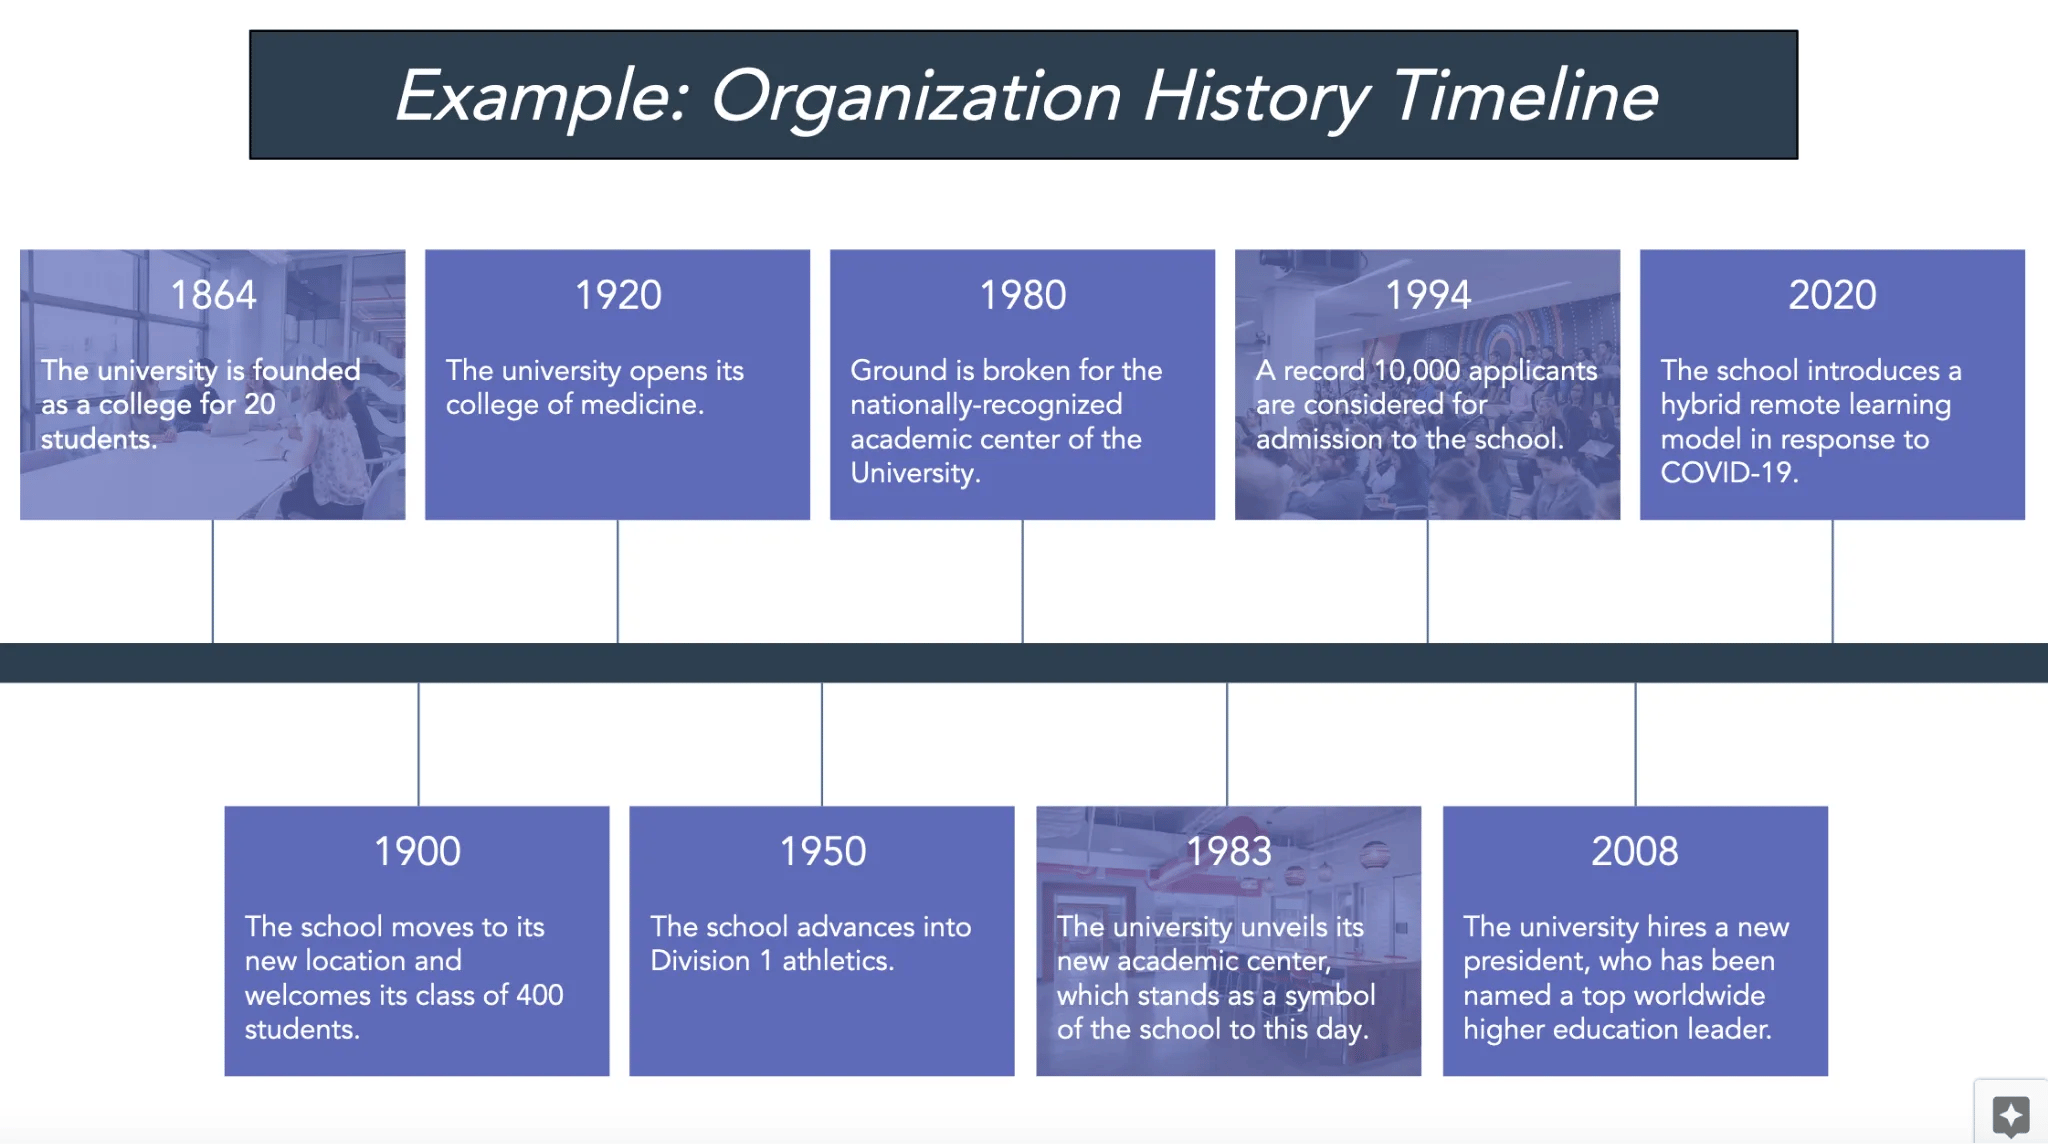 What Is a Project Timeline? Here's How To Make One (With Examples